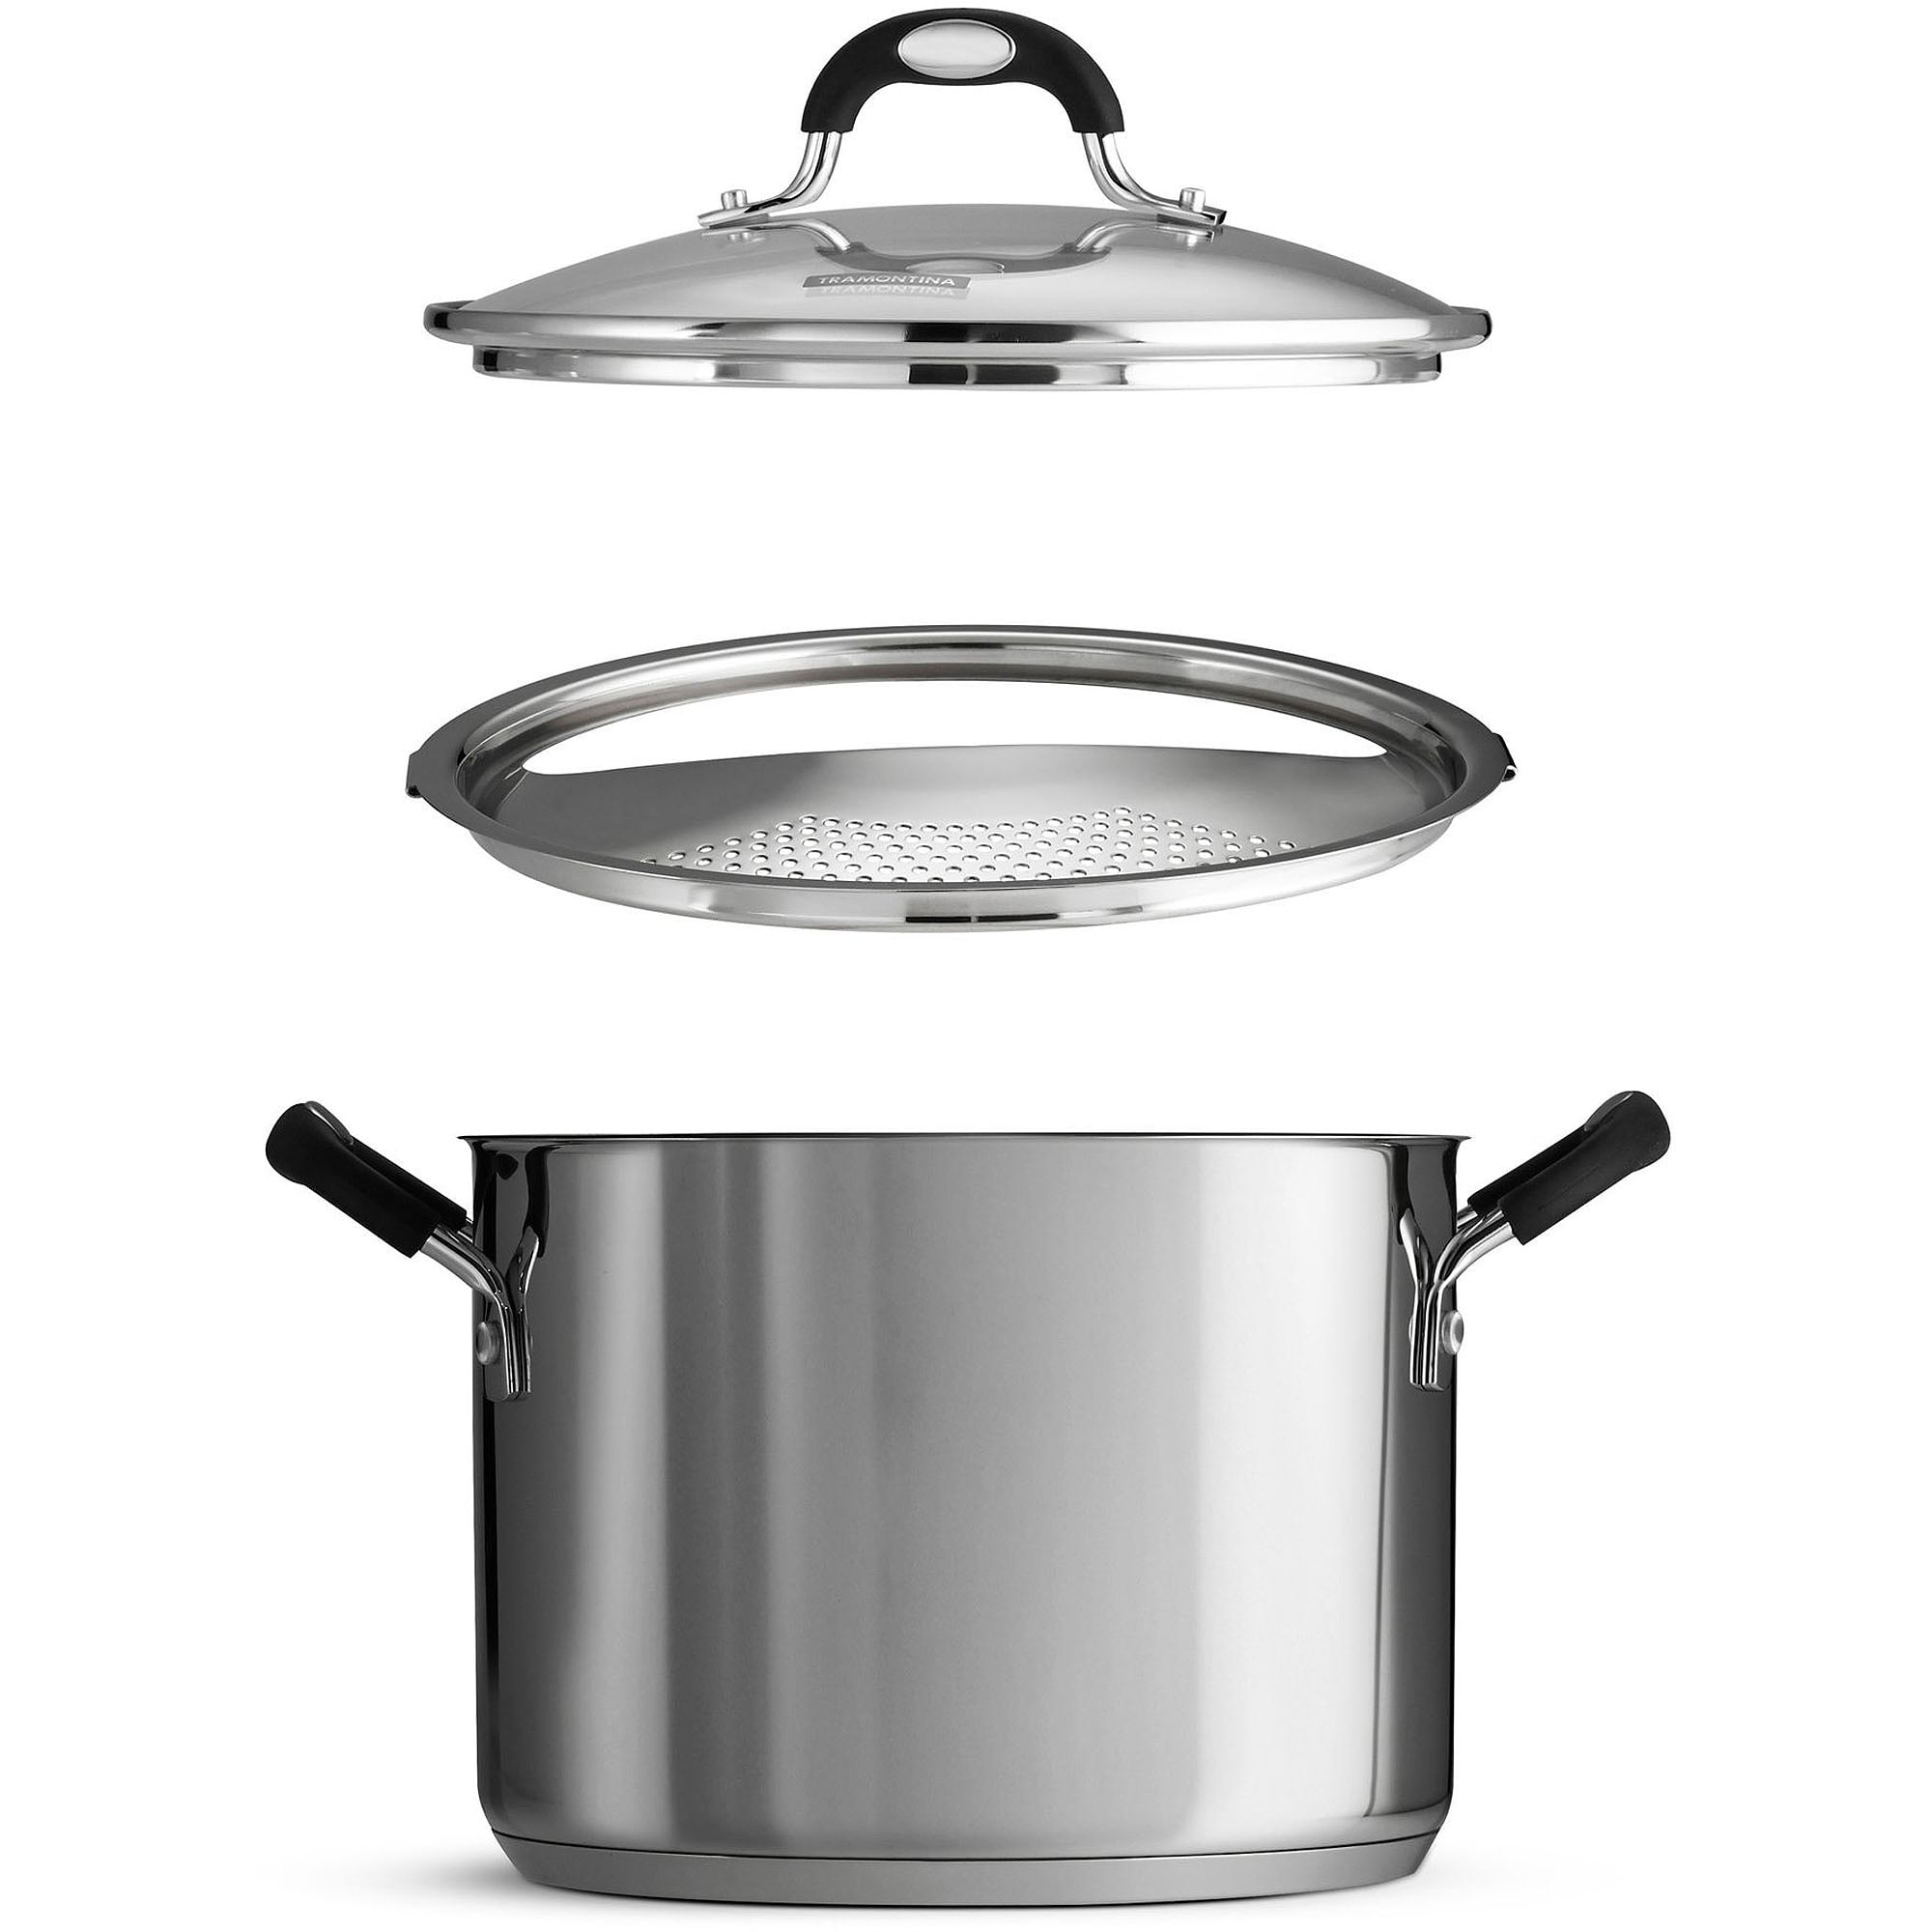 Rena Ware Cookware 6 Qt Stockpot 3-Ply Stainless Dutch Oven Saute Pan Lid  **Read